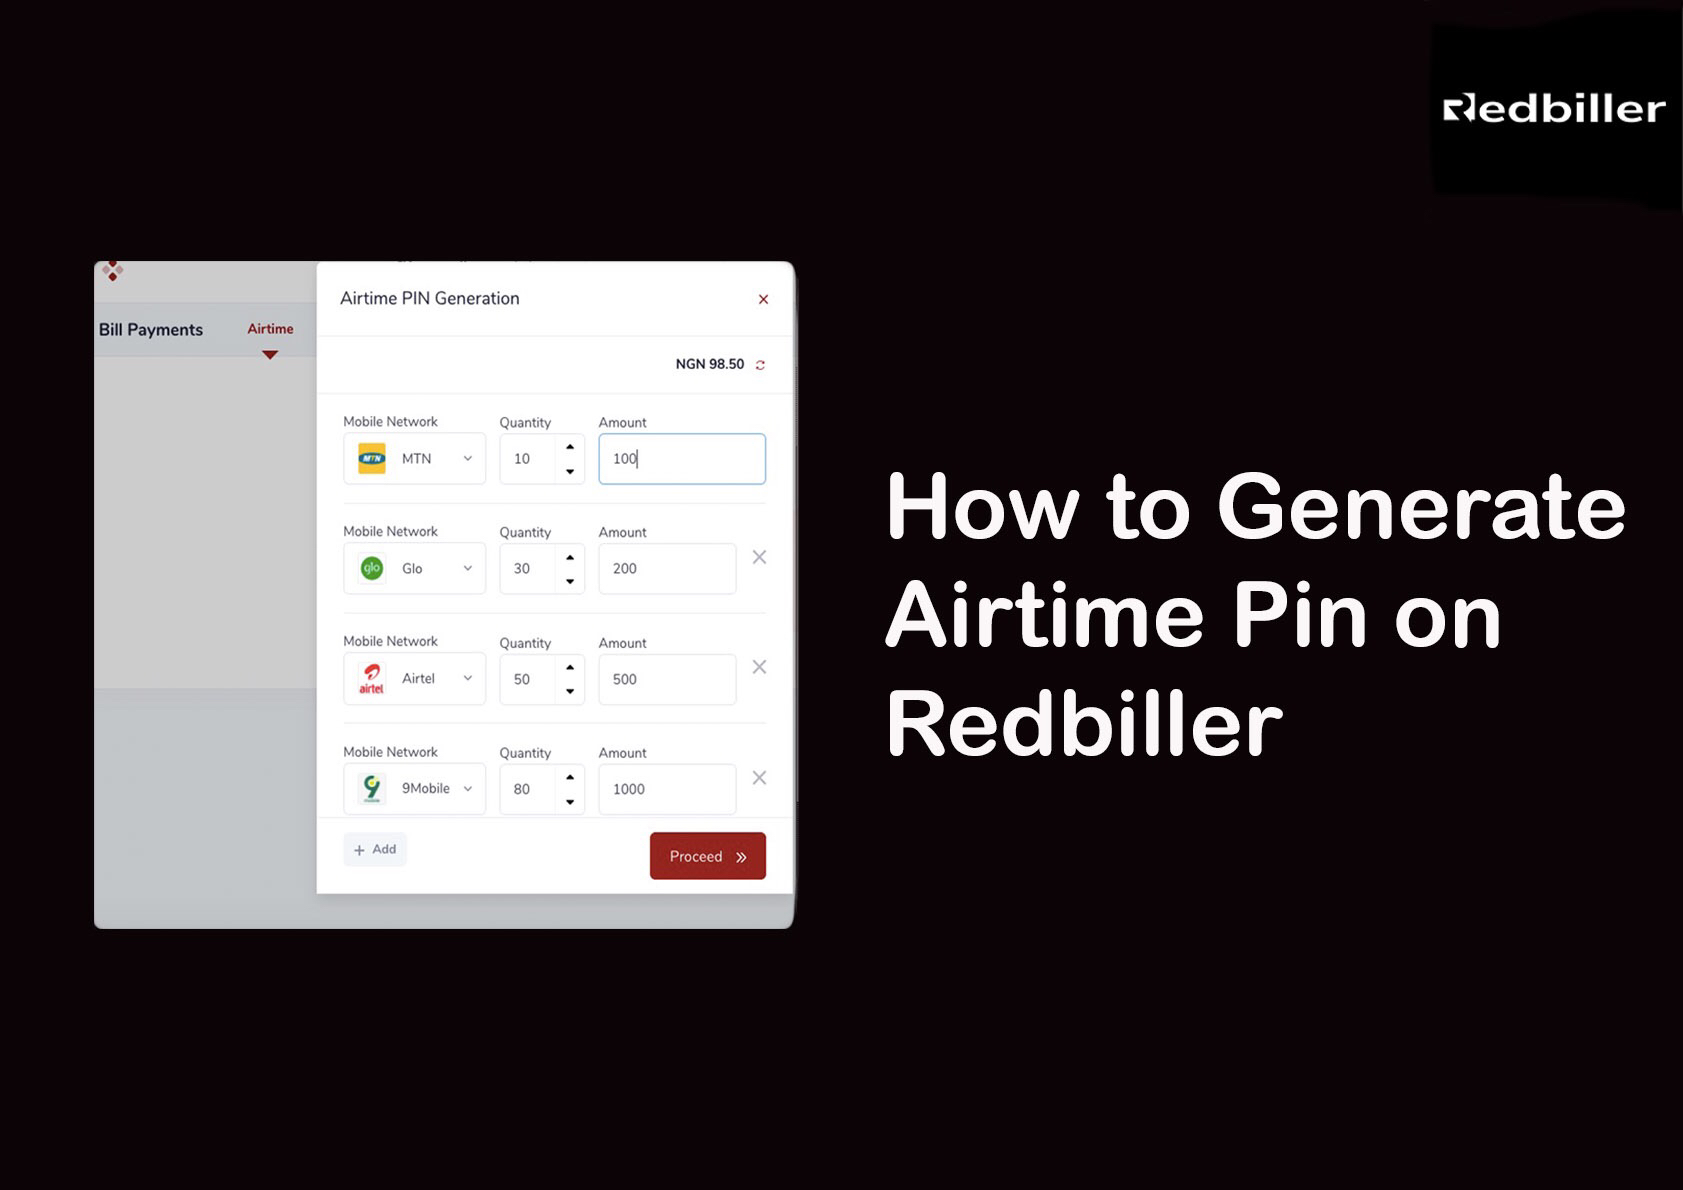 How to Generate Airtime PIN on Redbiller